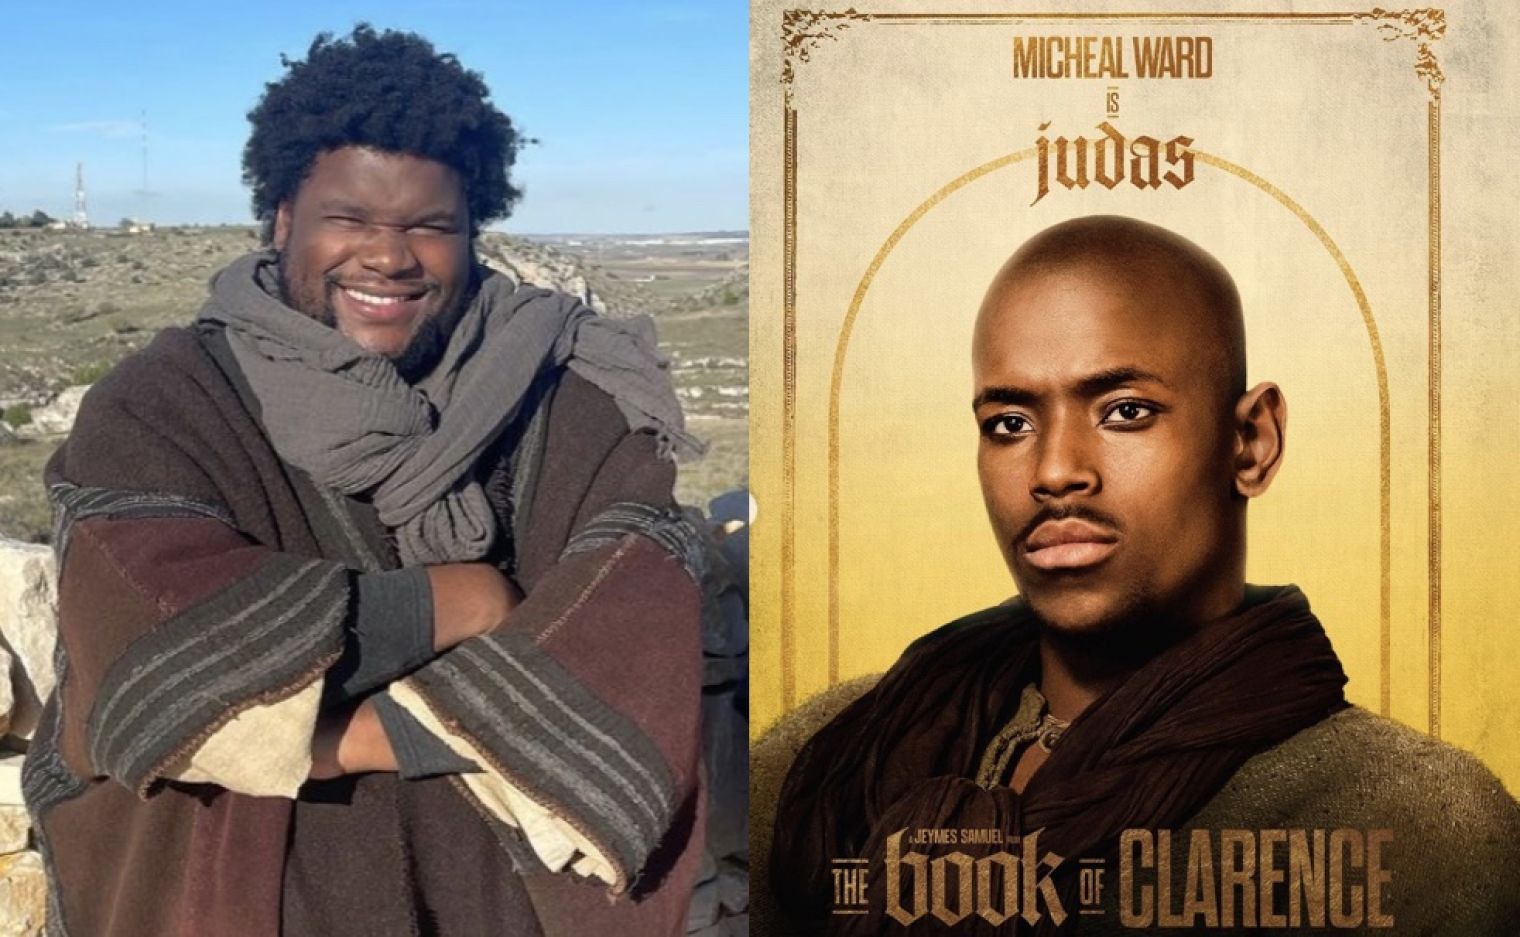 Micheal Ward and Tuwaine Barrett star as Judas Iscariot and Samson respectively in ’The Book of Clarence’ which is out in UK cinemas tomorrow